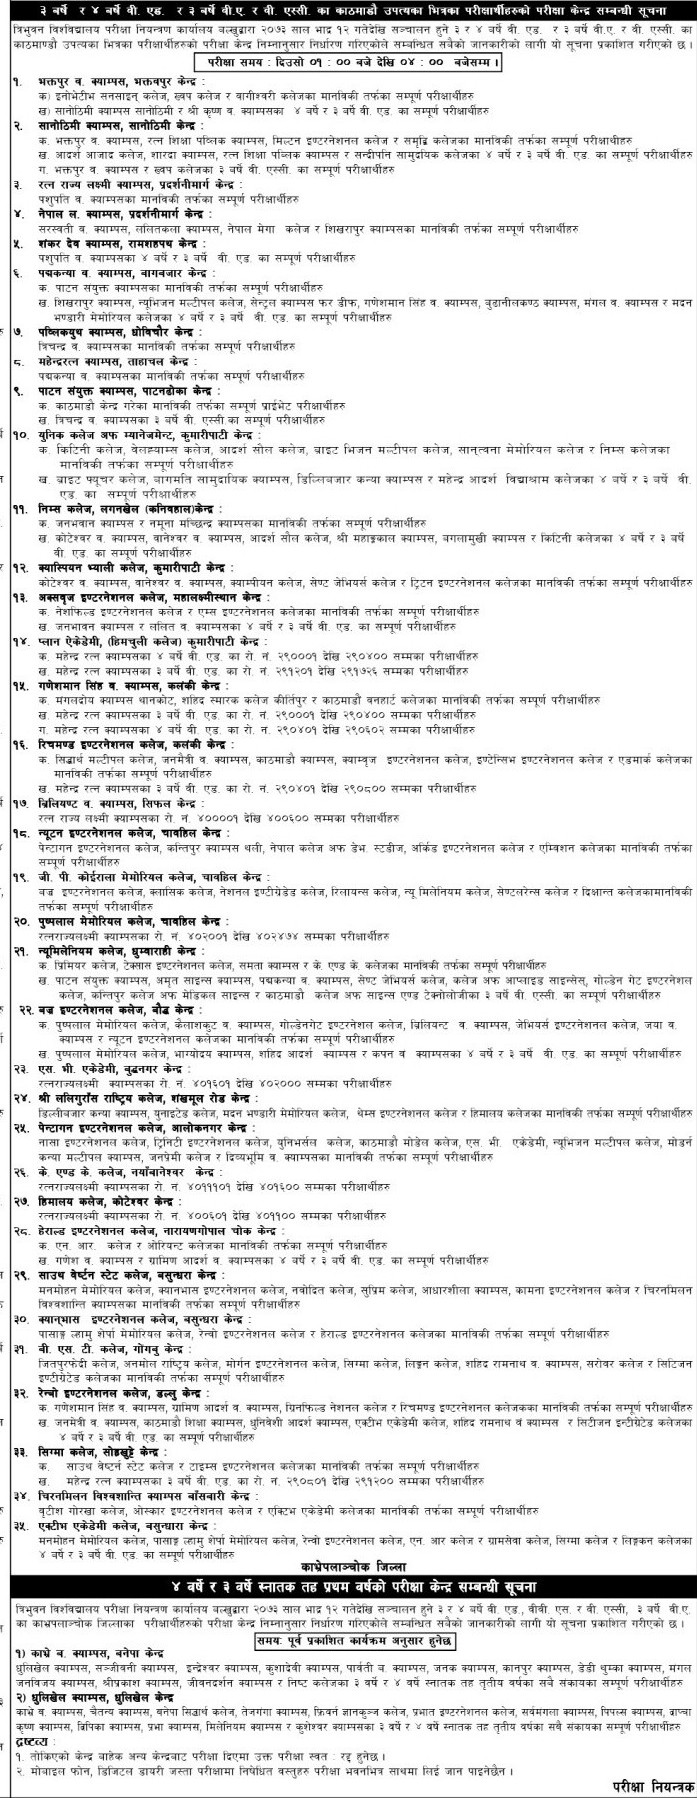 Bachelor level first year Exam Center notice from Tribhuvan University